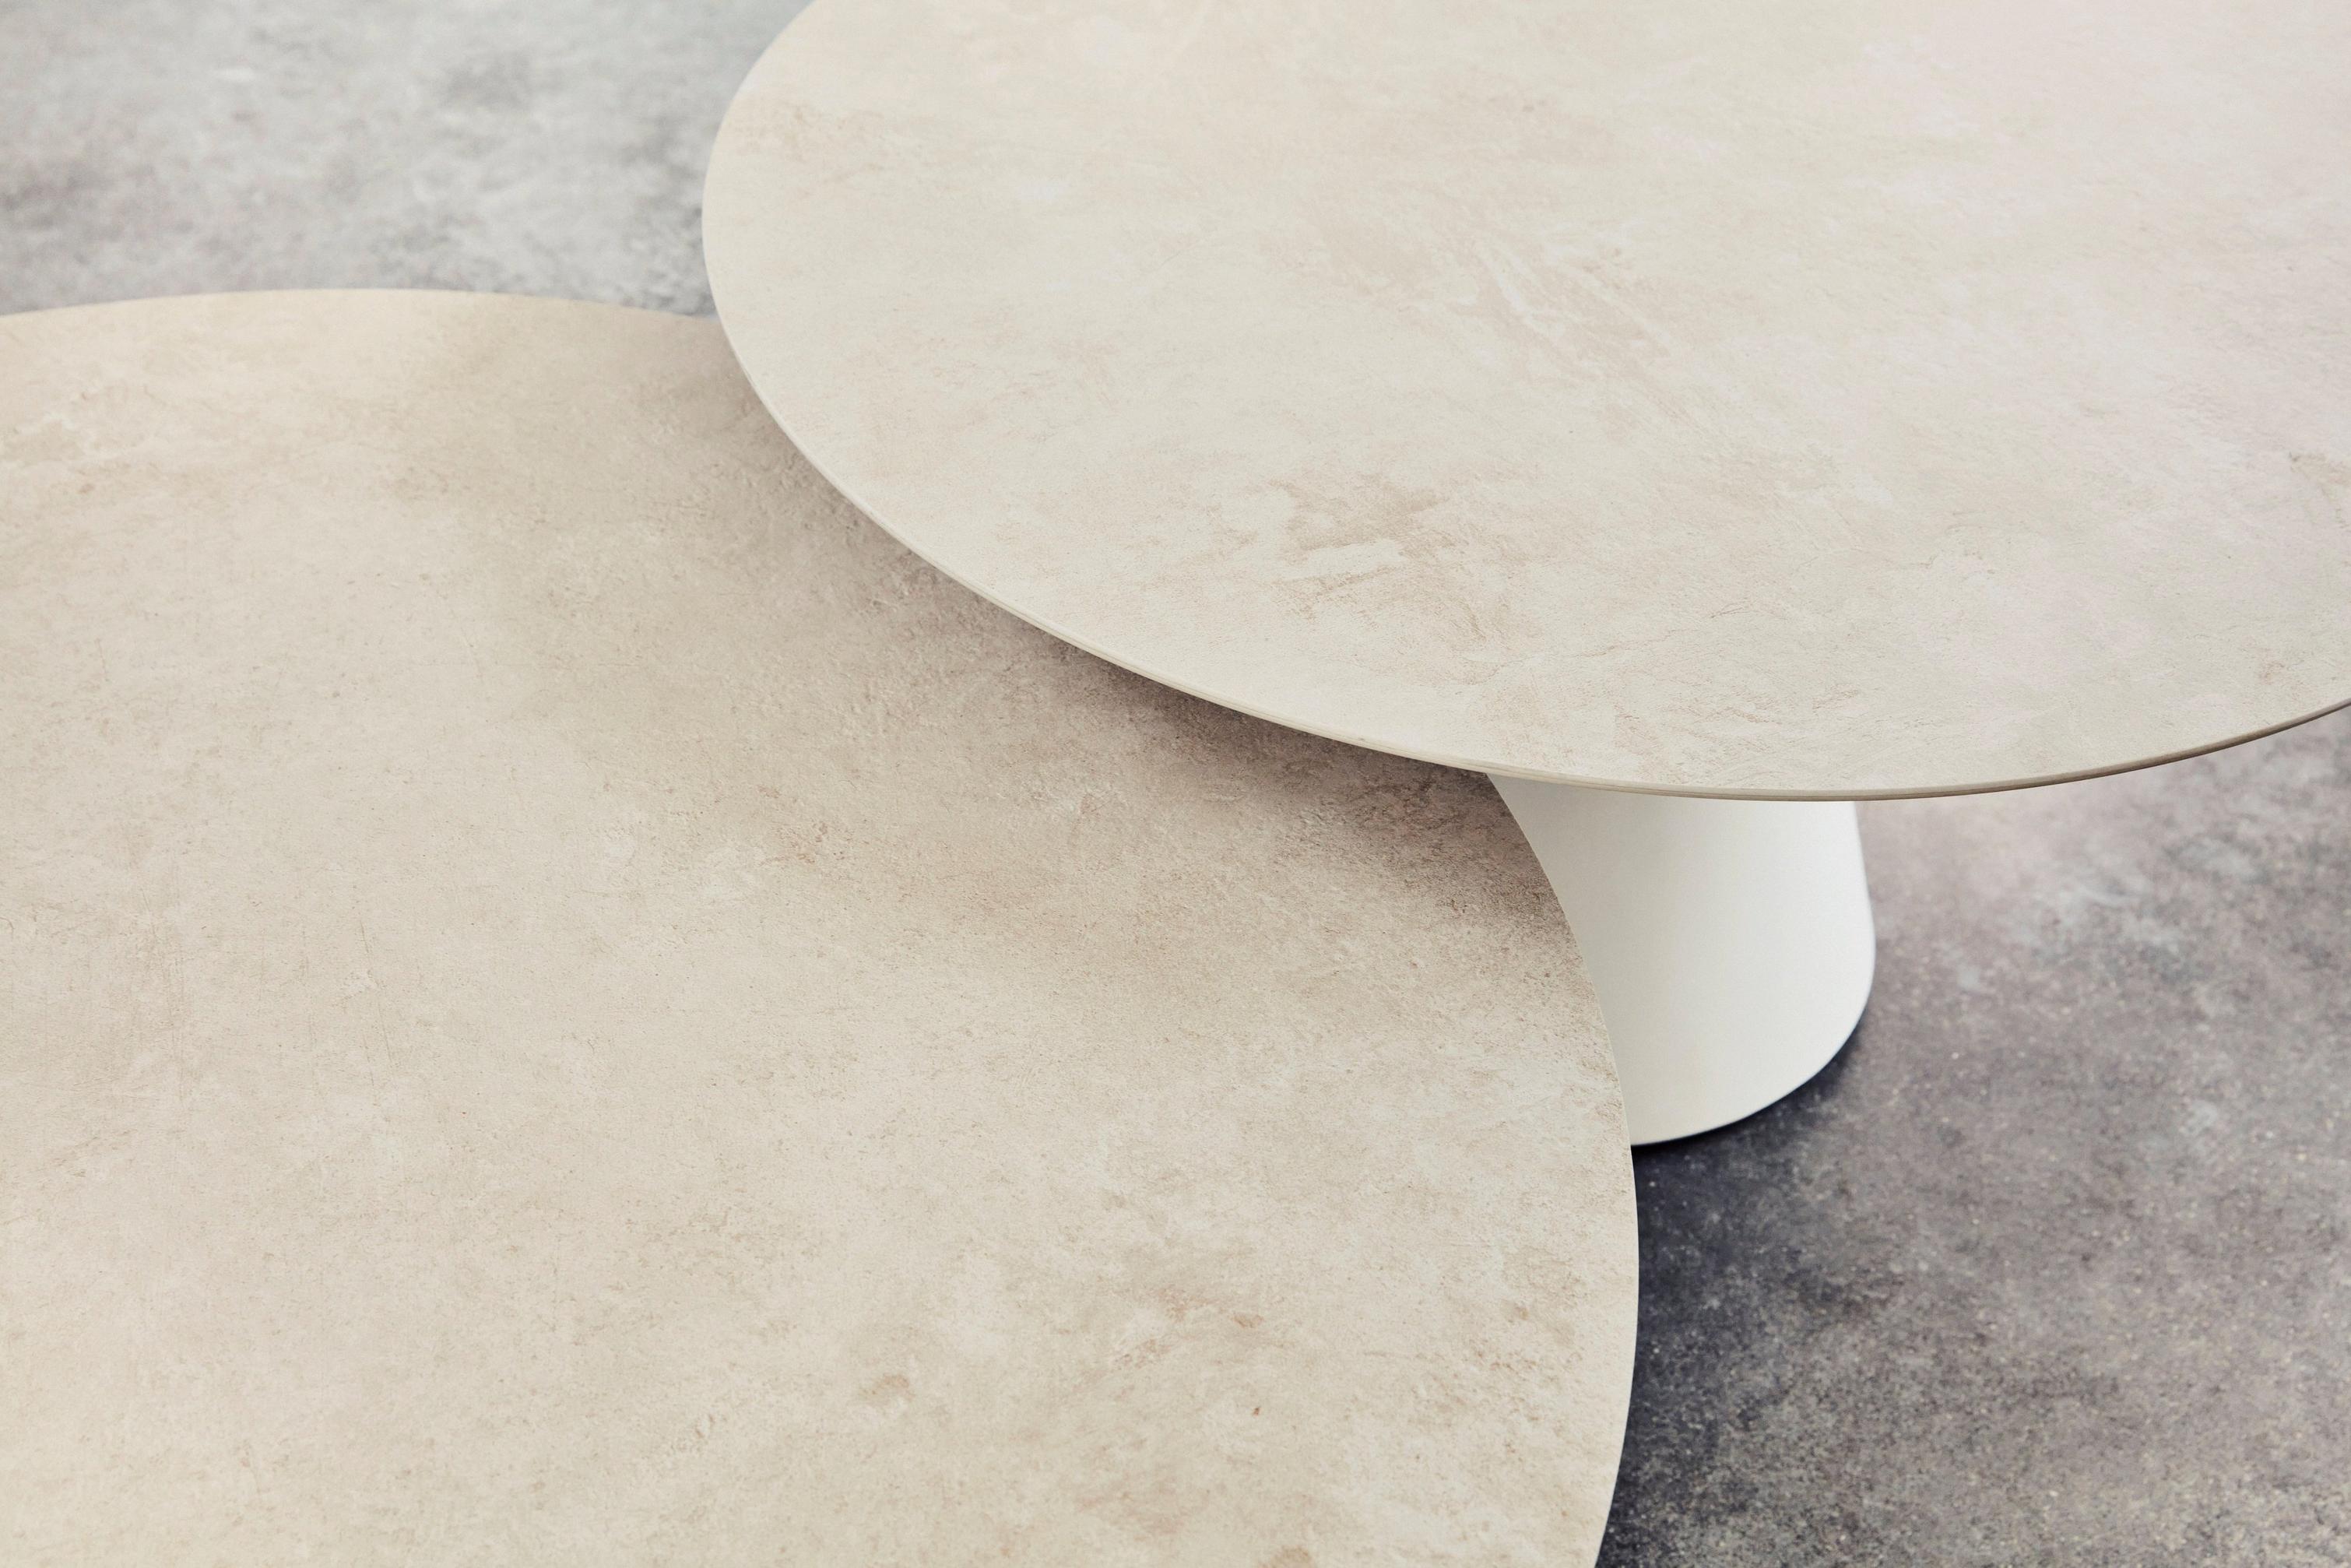 Two overlapping round ceramic Madrid tabletops with neutral tones.